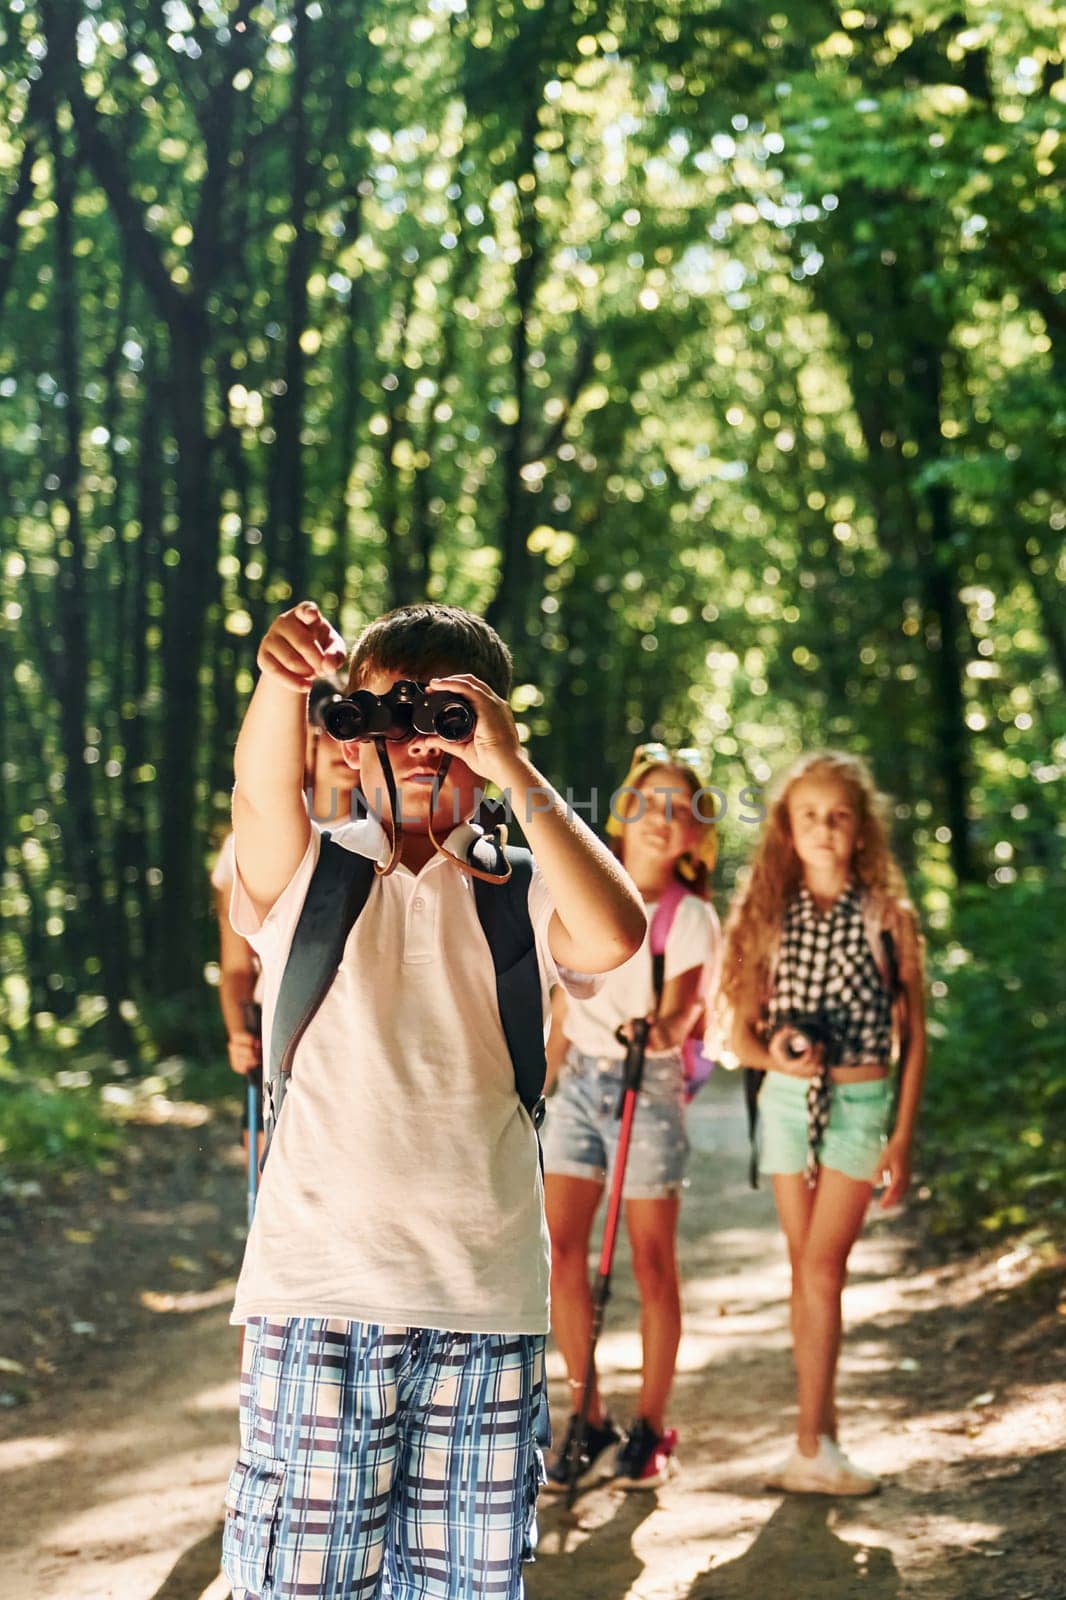 Beautiful nature. Kids strolling in the forest with travel equipment by Standret